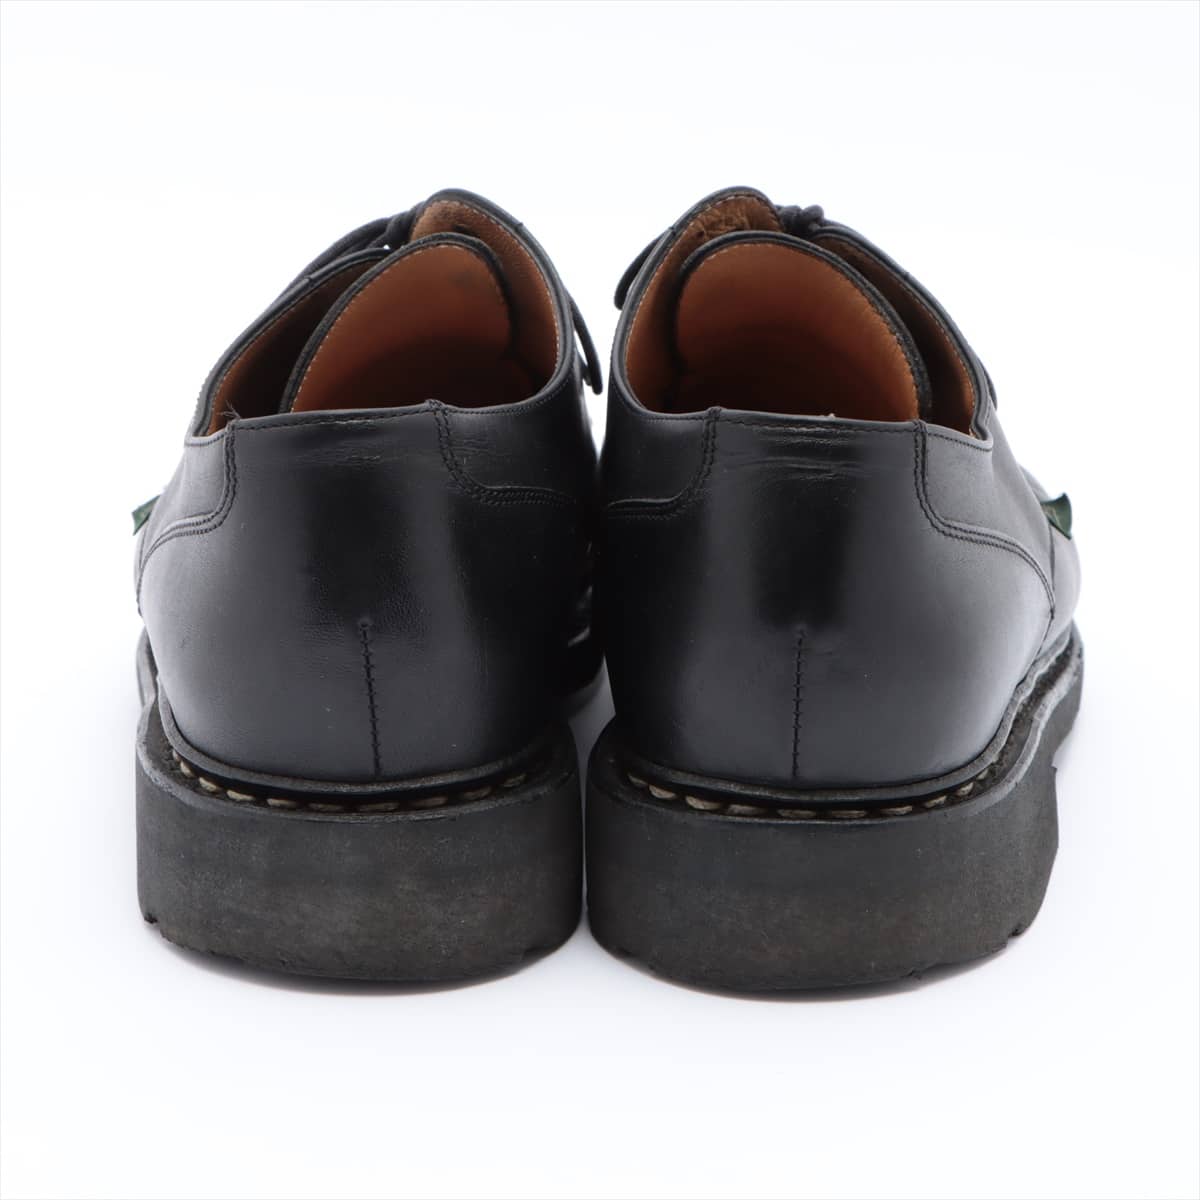 Paraboot Leather Leather shoes 7 Men's Black